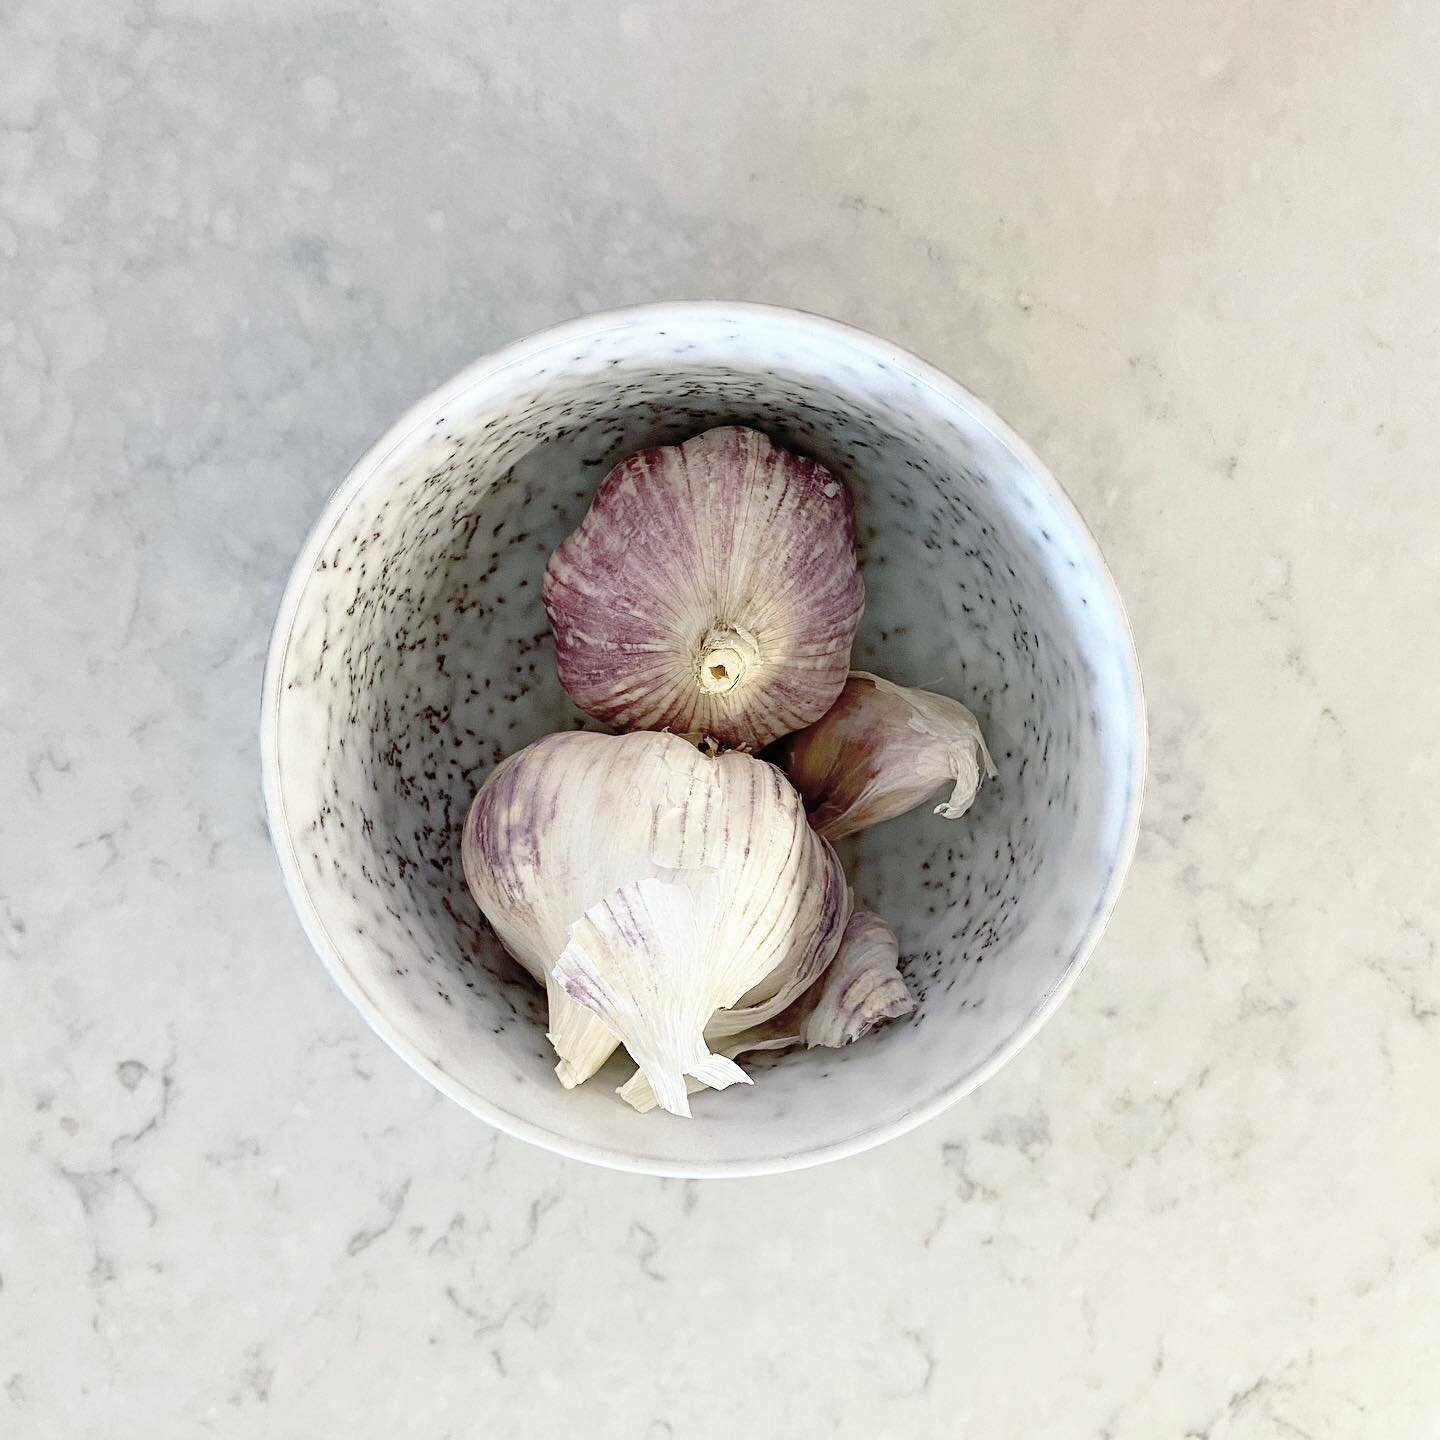 It&rsquo;s the simple things - endlessly inspired by produce 

#palette #garlic #beautifulproduce #foodphotography #marble #noblegrey #wabisabi #propstyling